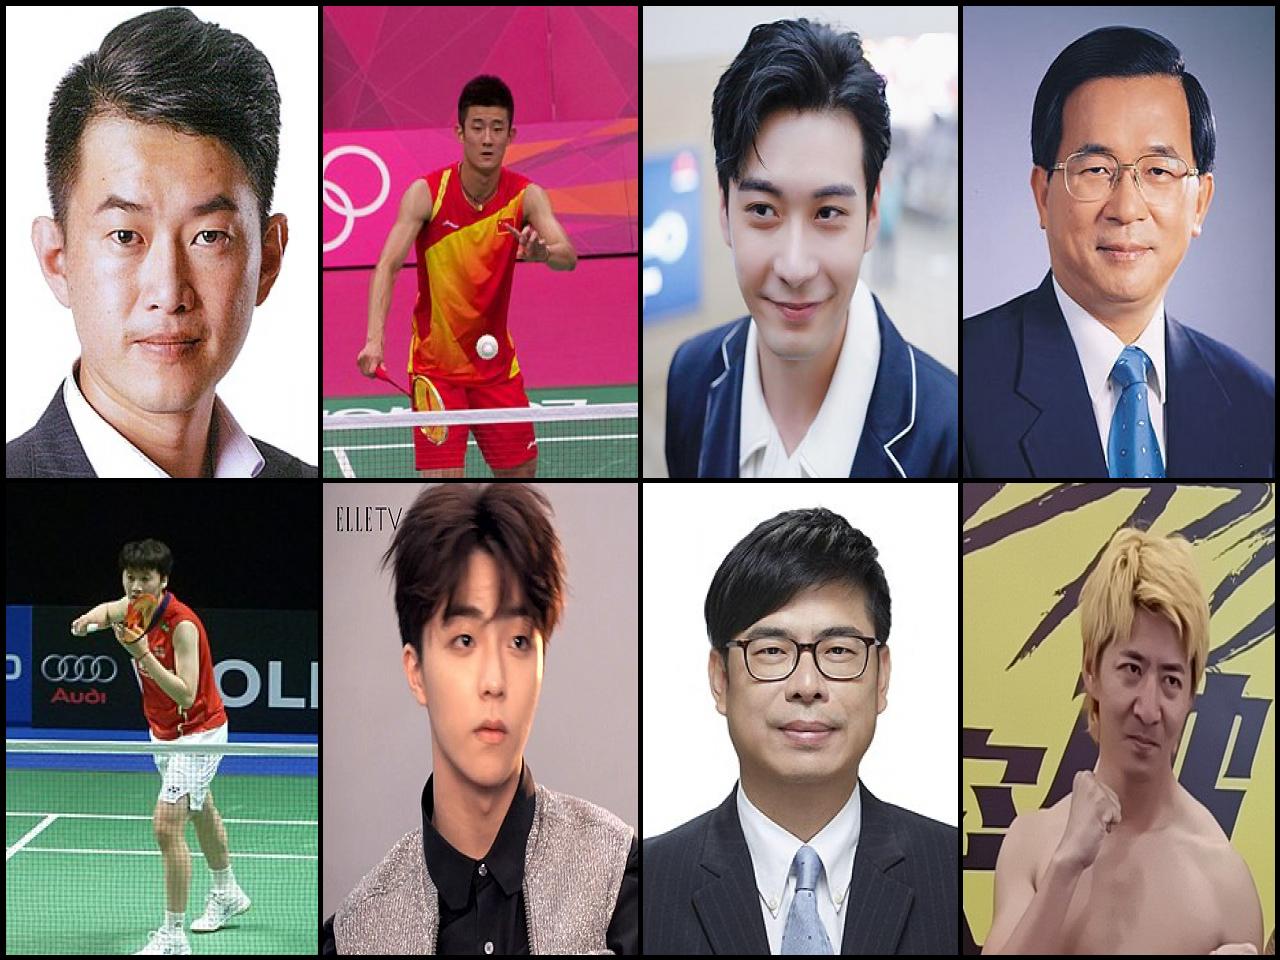 List of Famous people named <b>Chen</b>